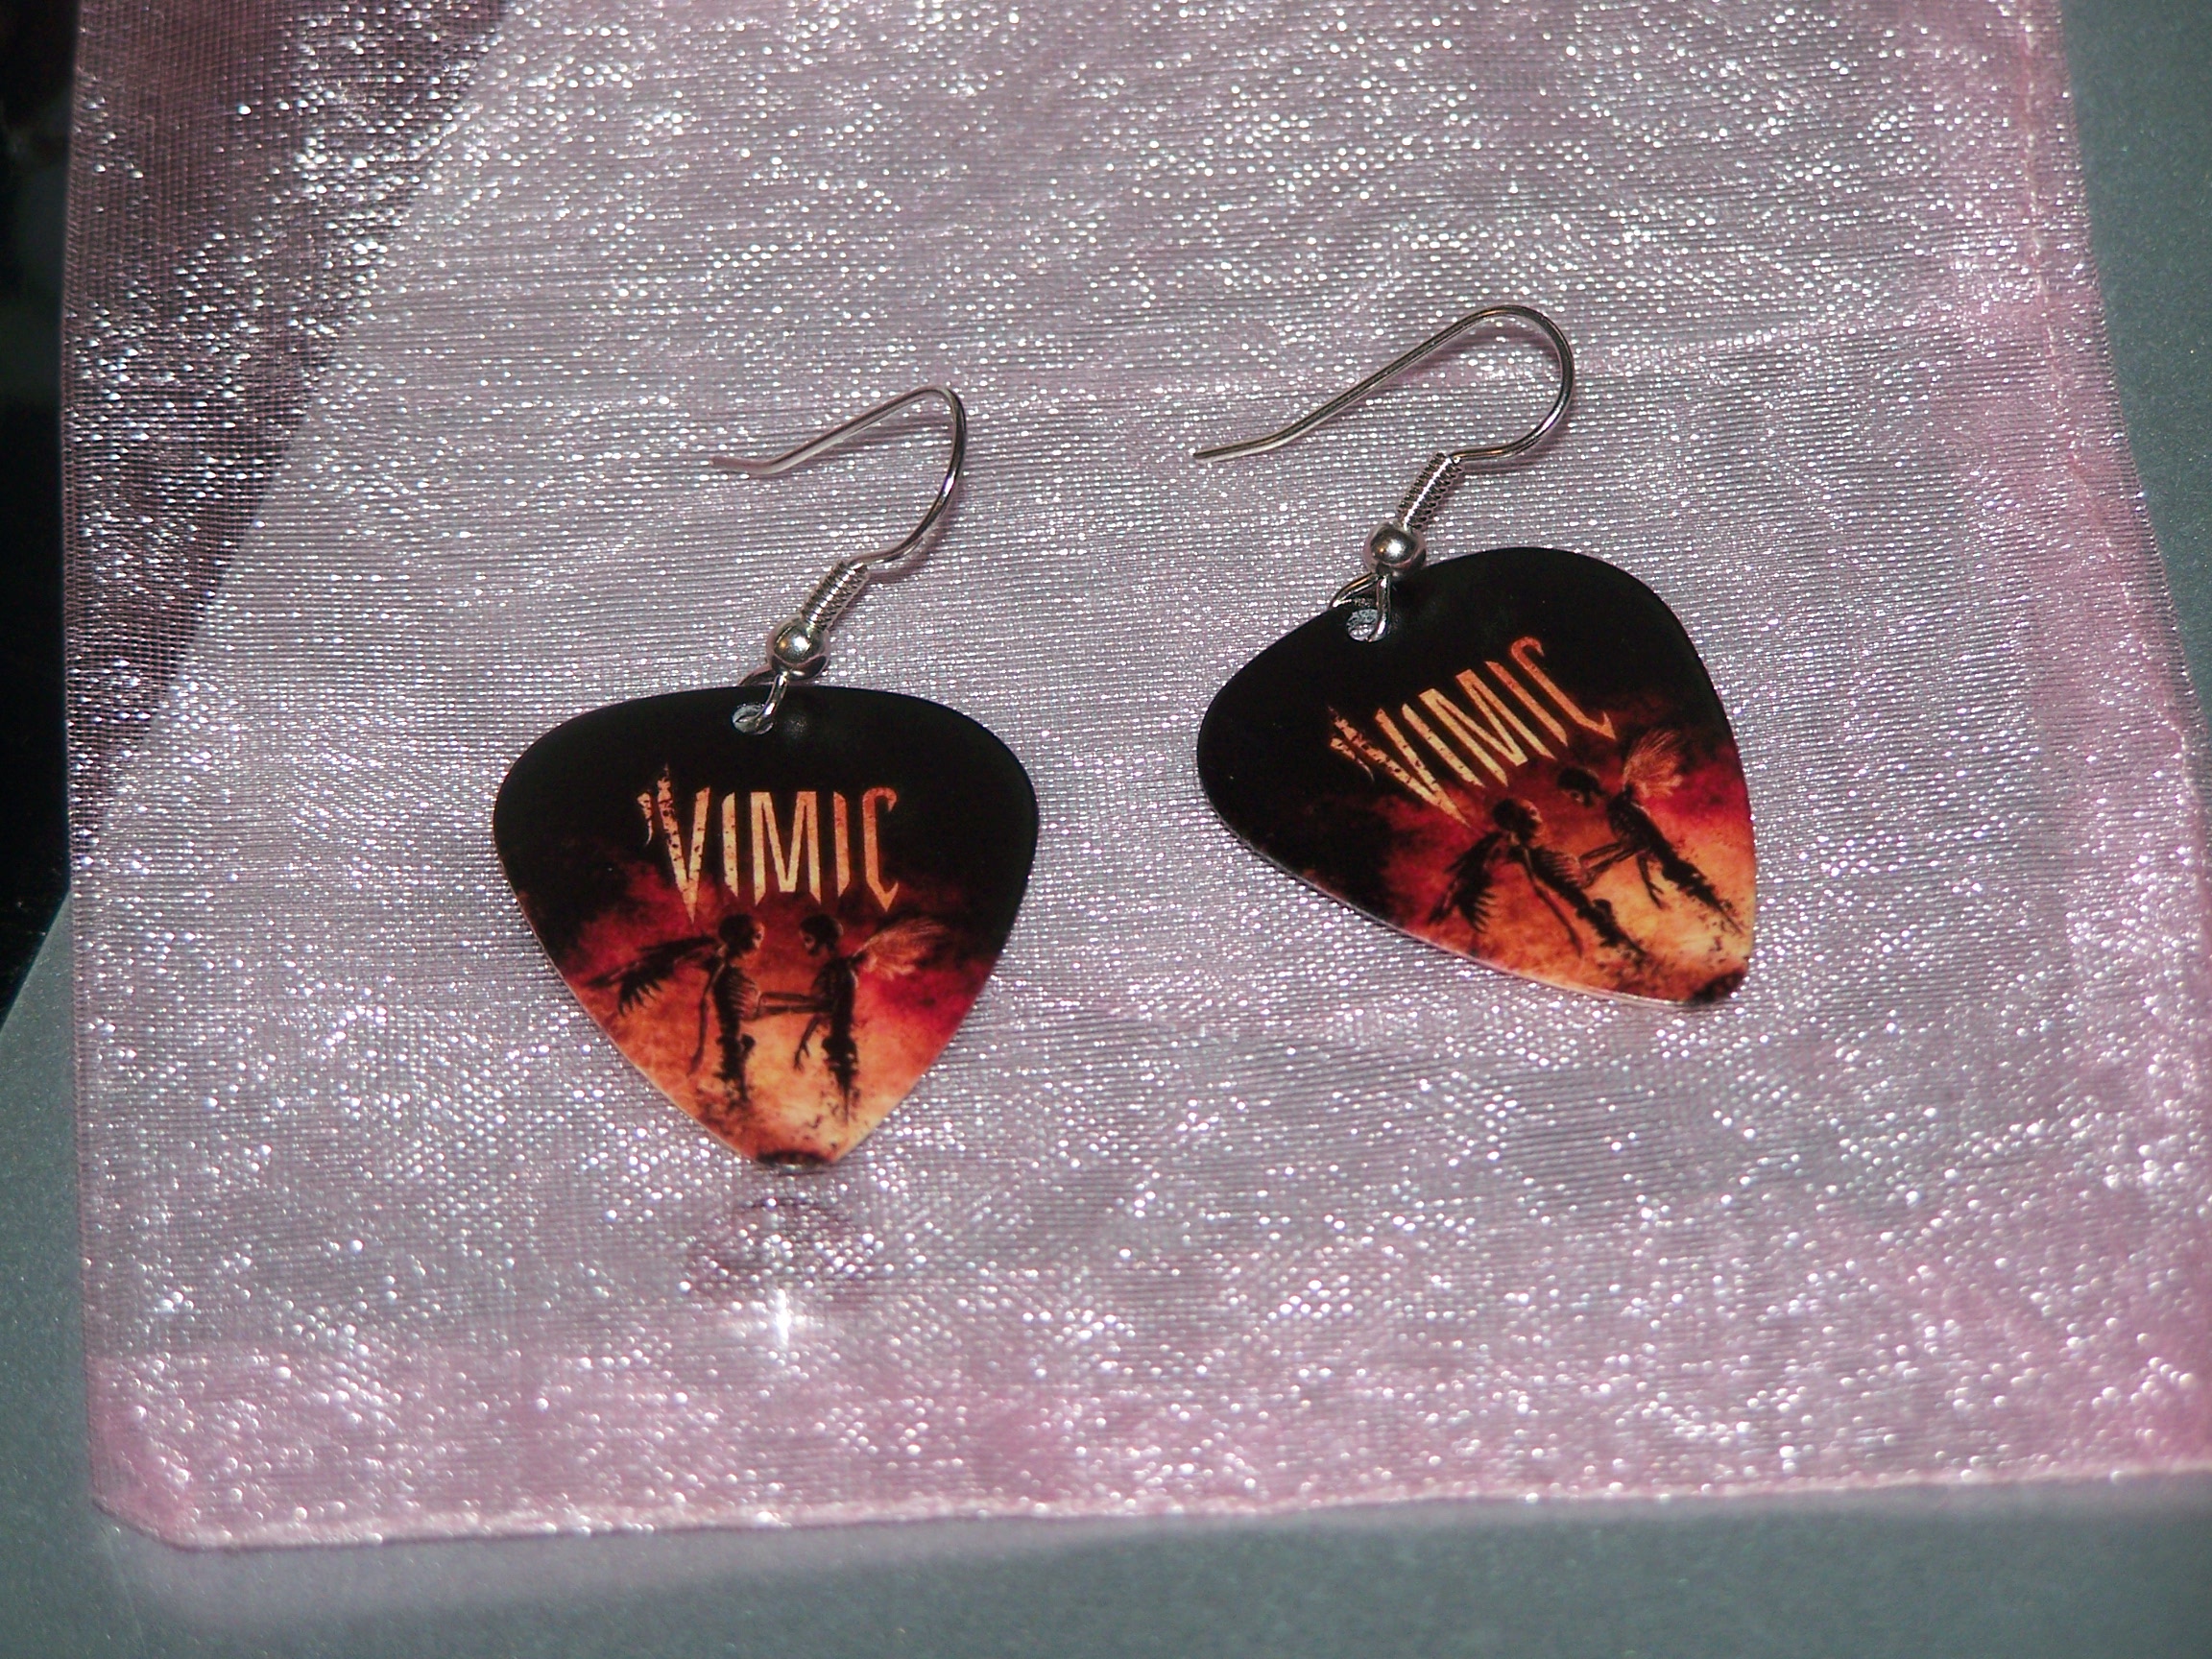 guitar pick earring made with sublimation printing